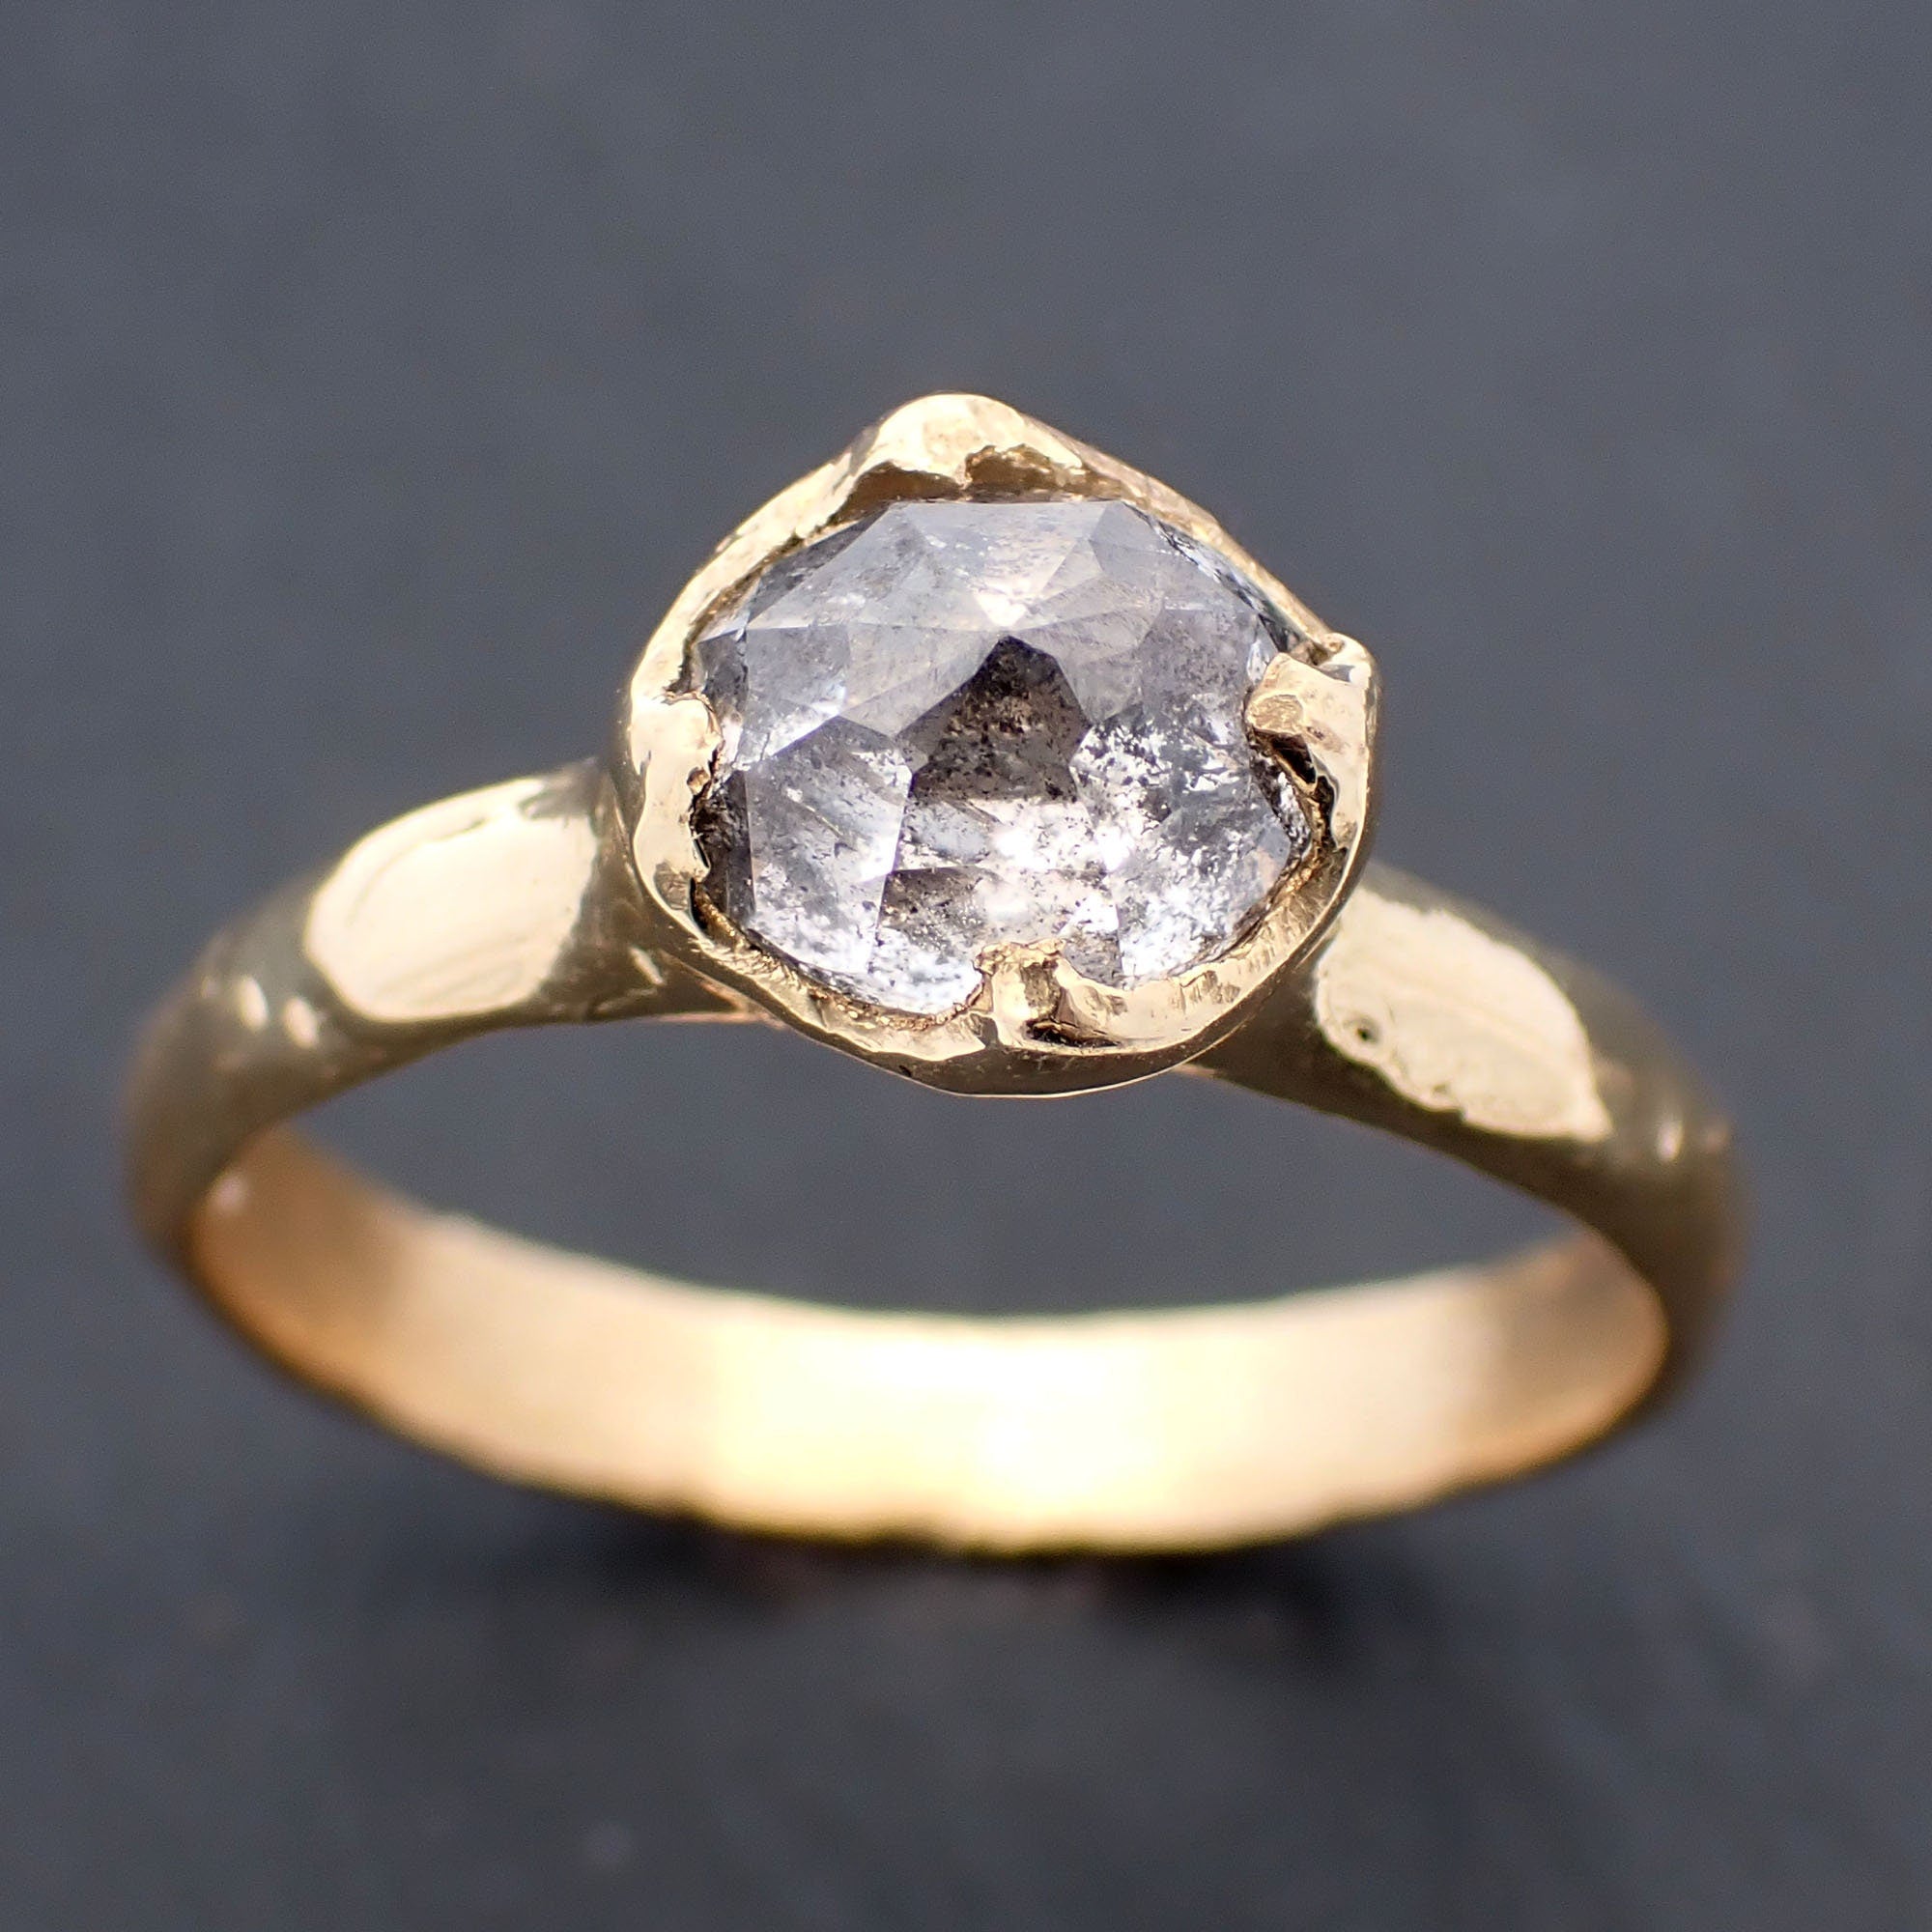 Faceted Fancy cut Salt and Pepper Diamond Solitaire Engagement 18k Yellow Gold Wedding Ring byAngeline 3448